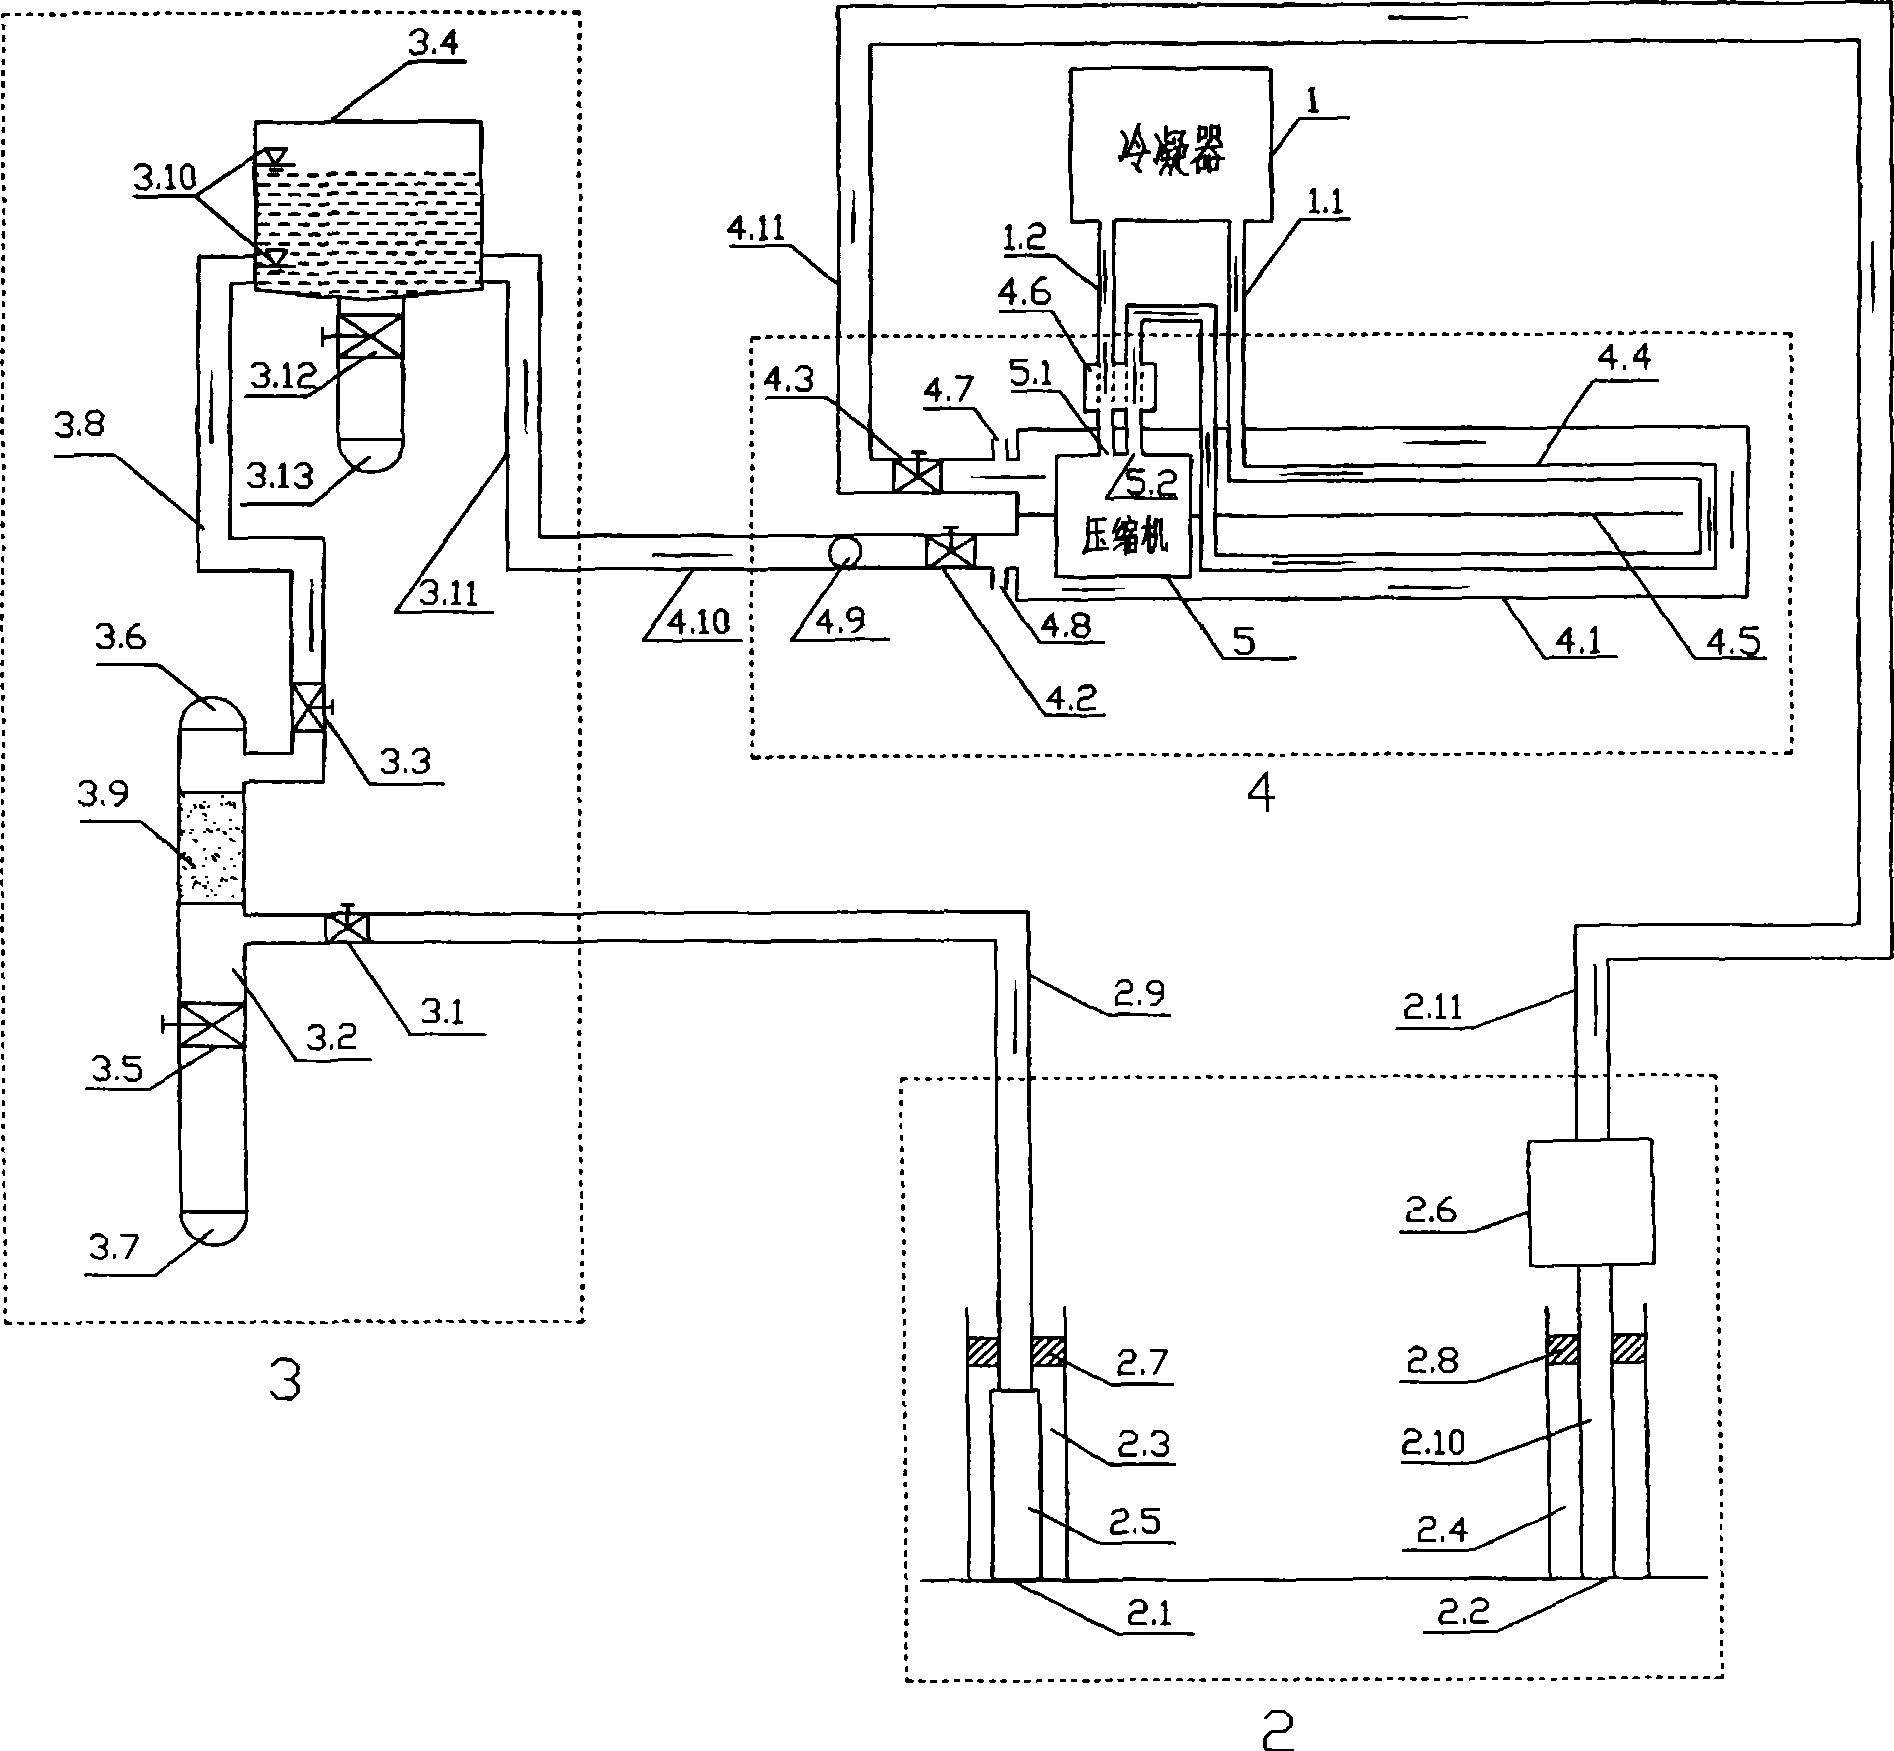 Water-cooling type air conditioning system